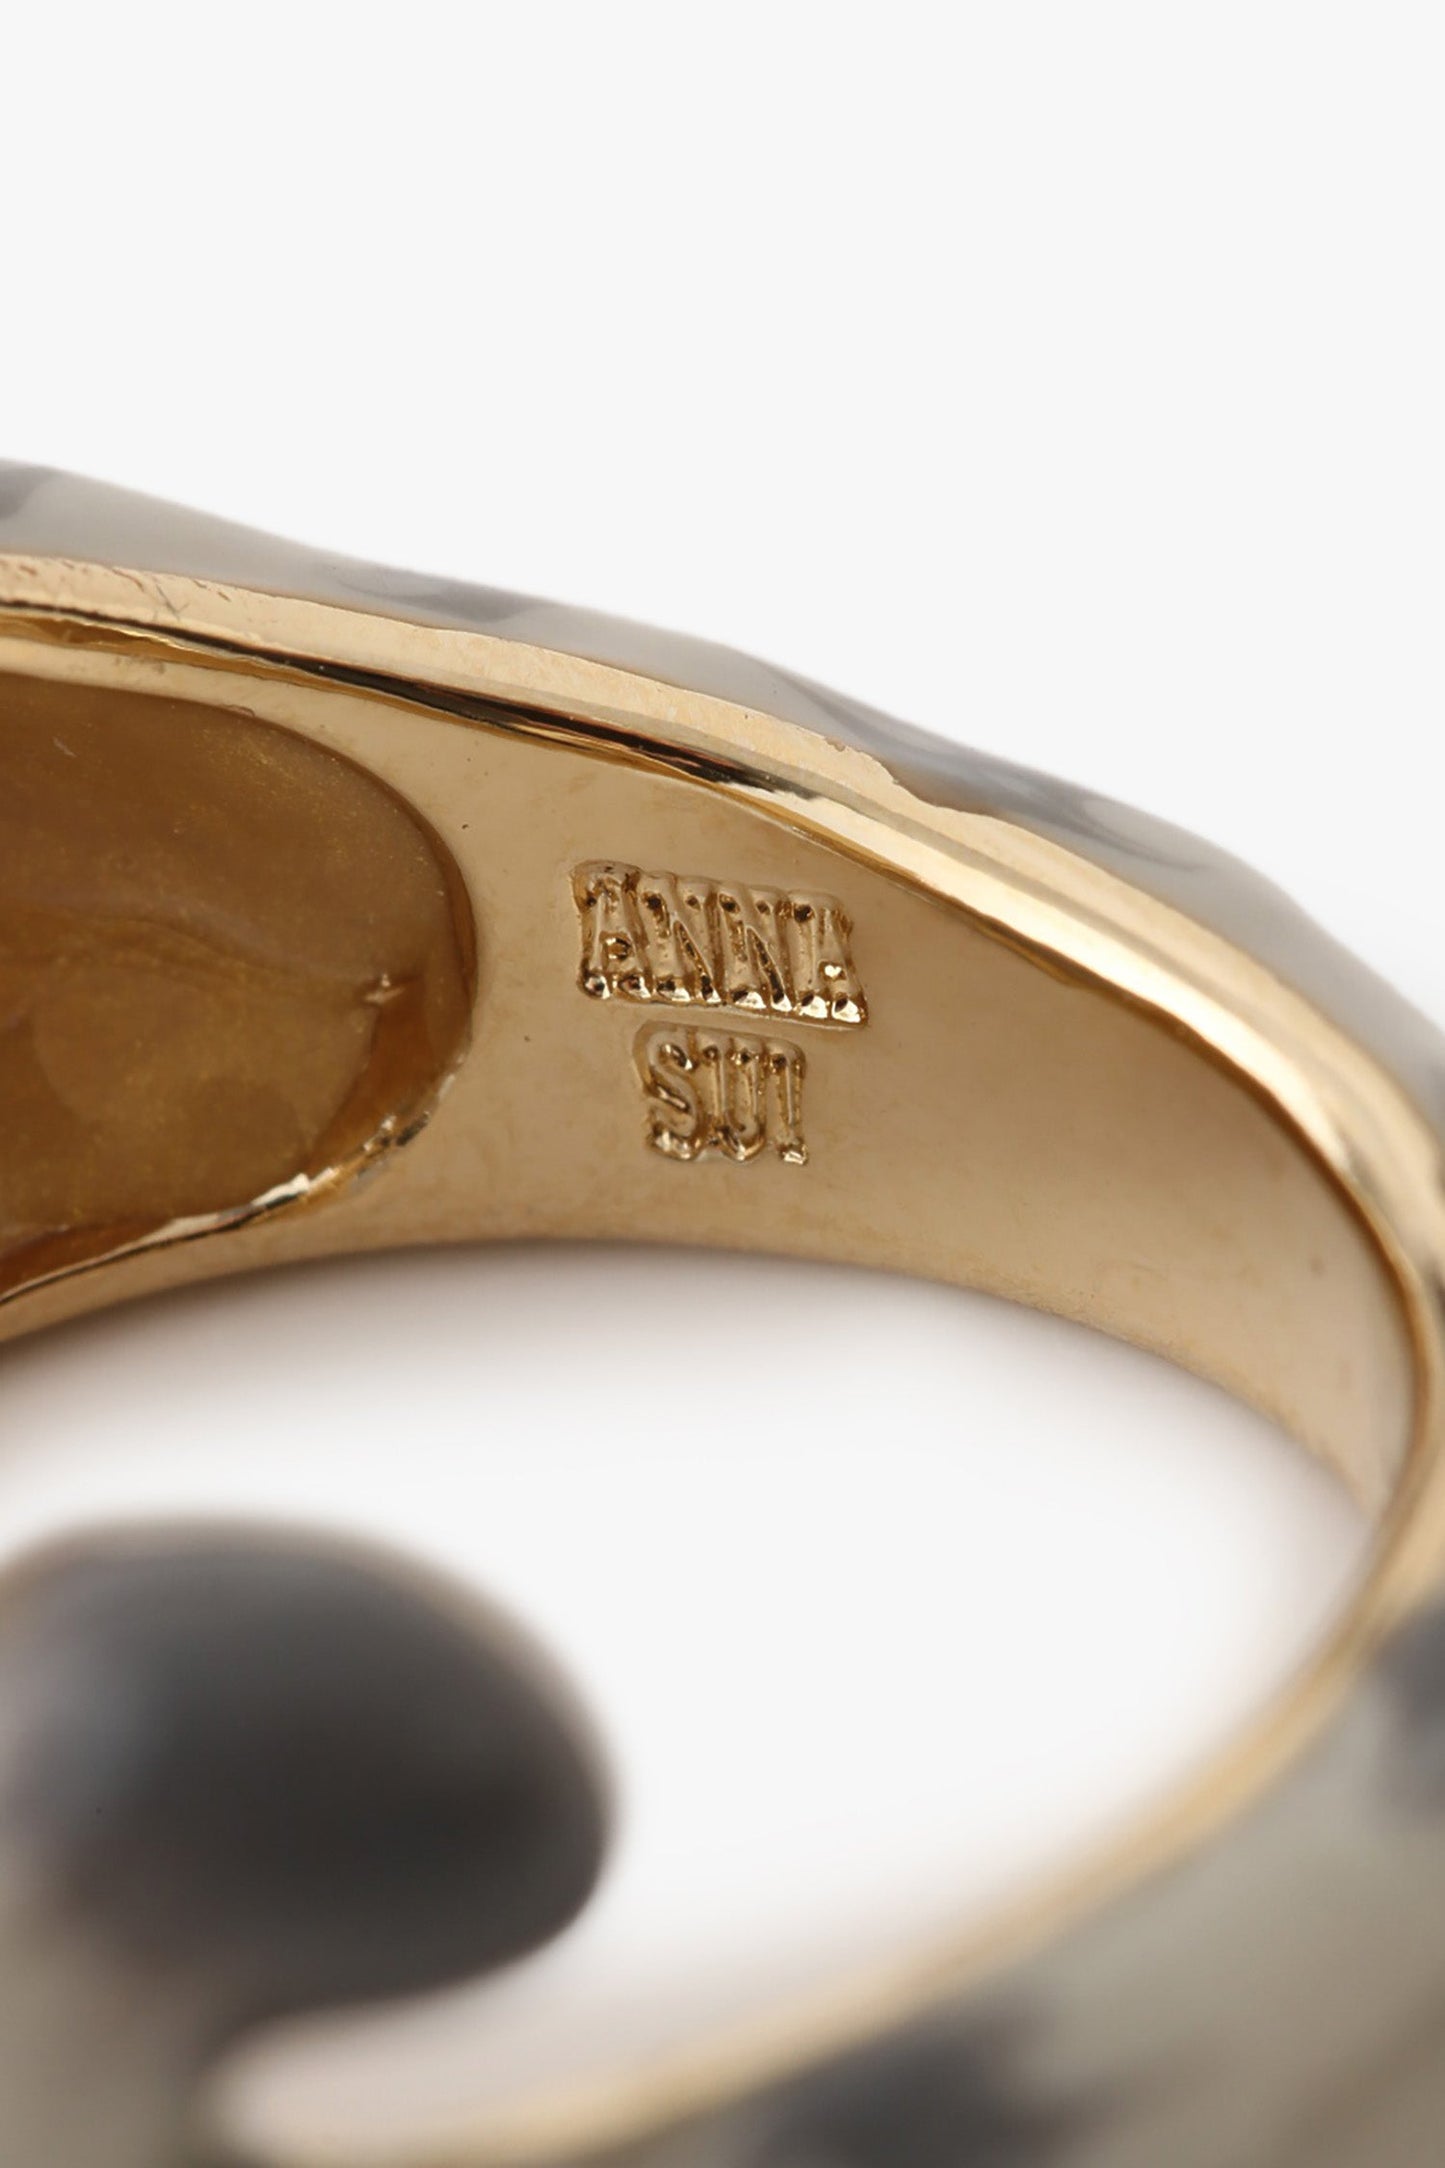 Detail of Anna Sui imprint inside the ring